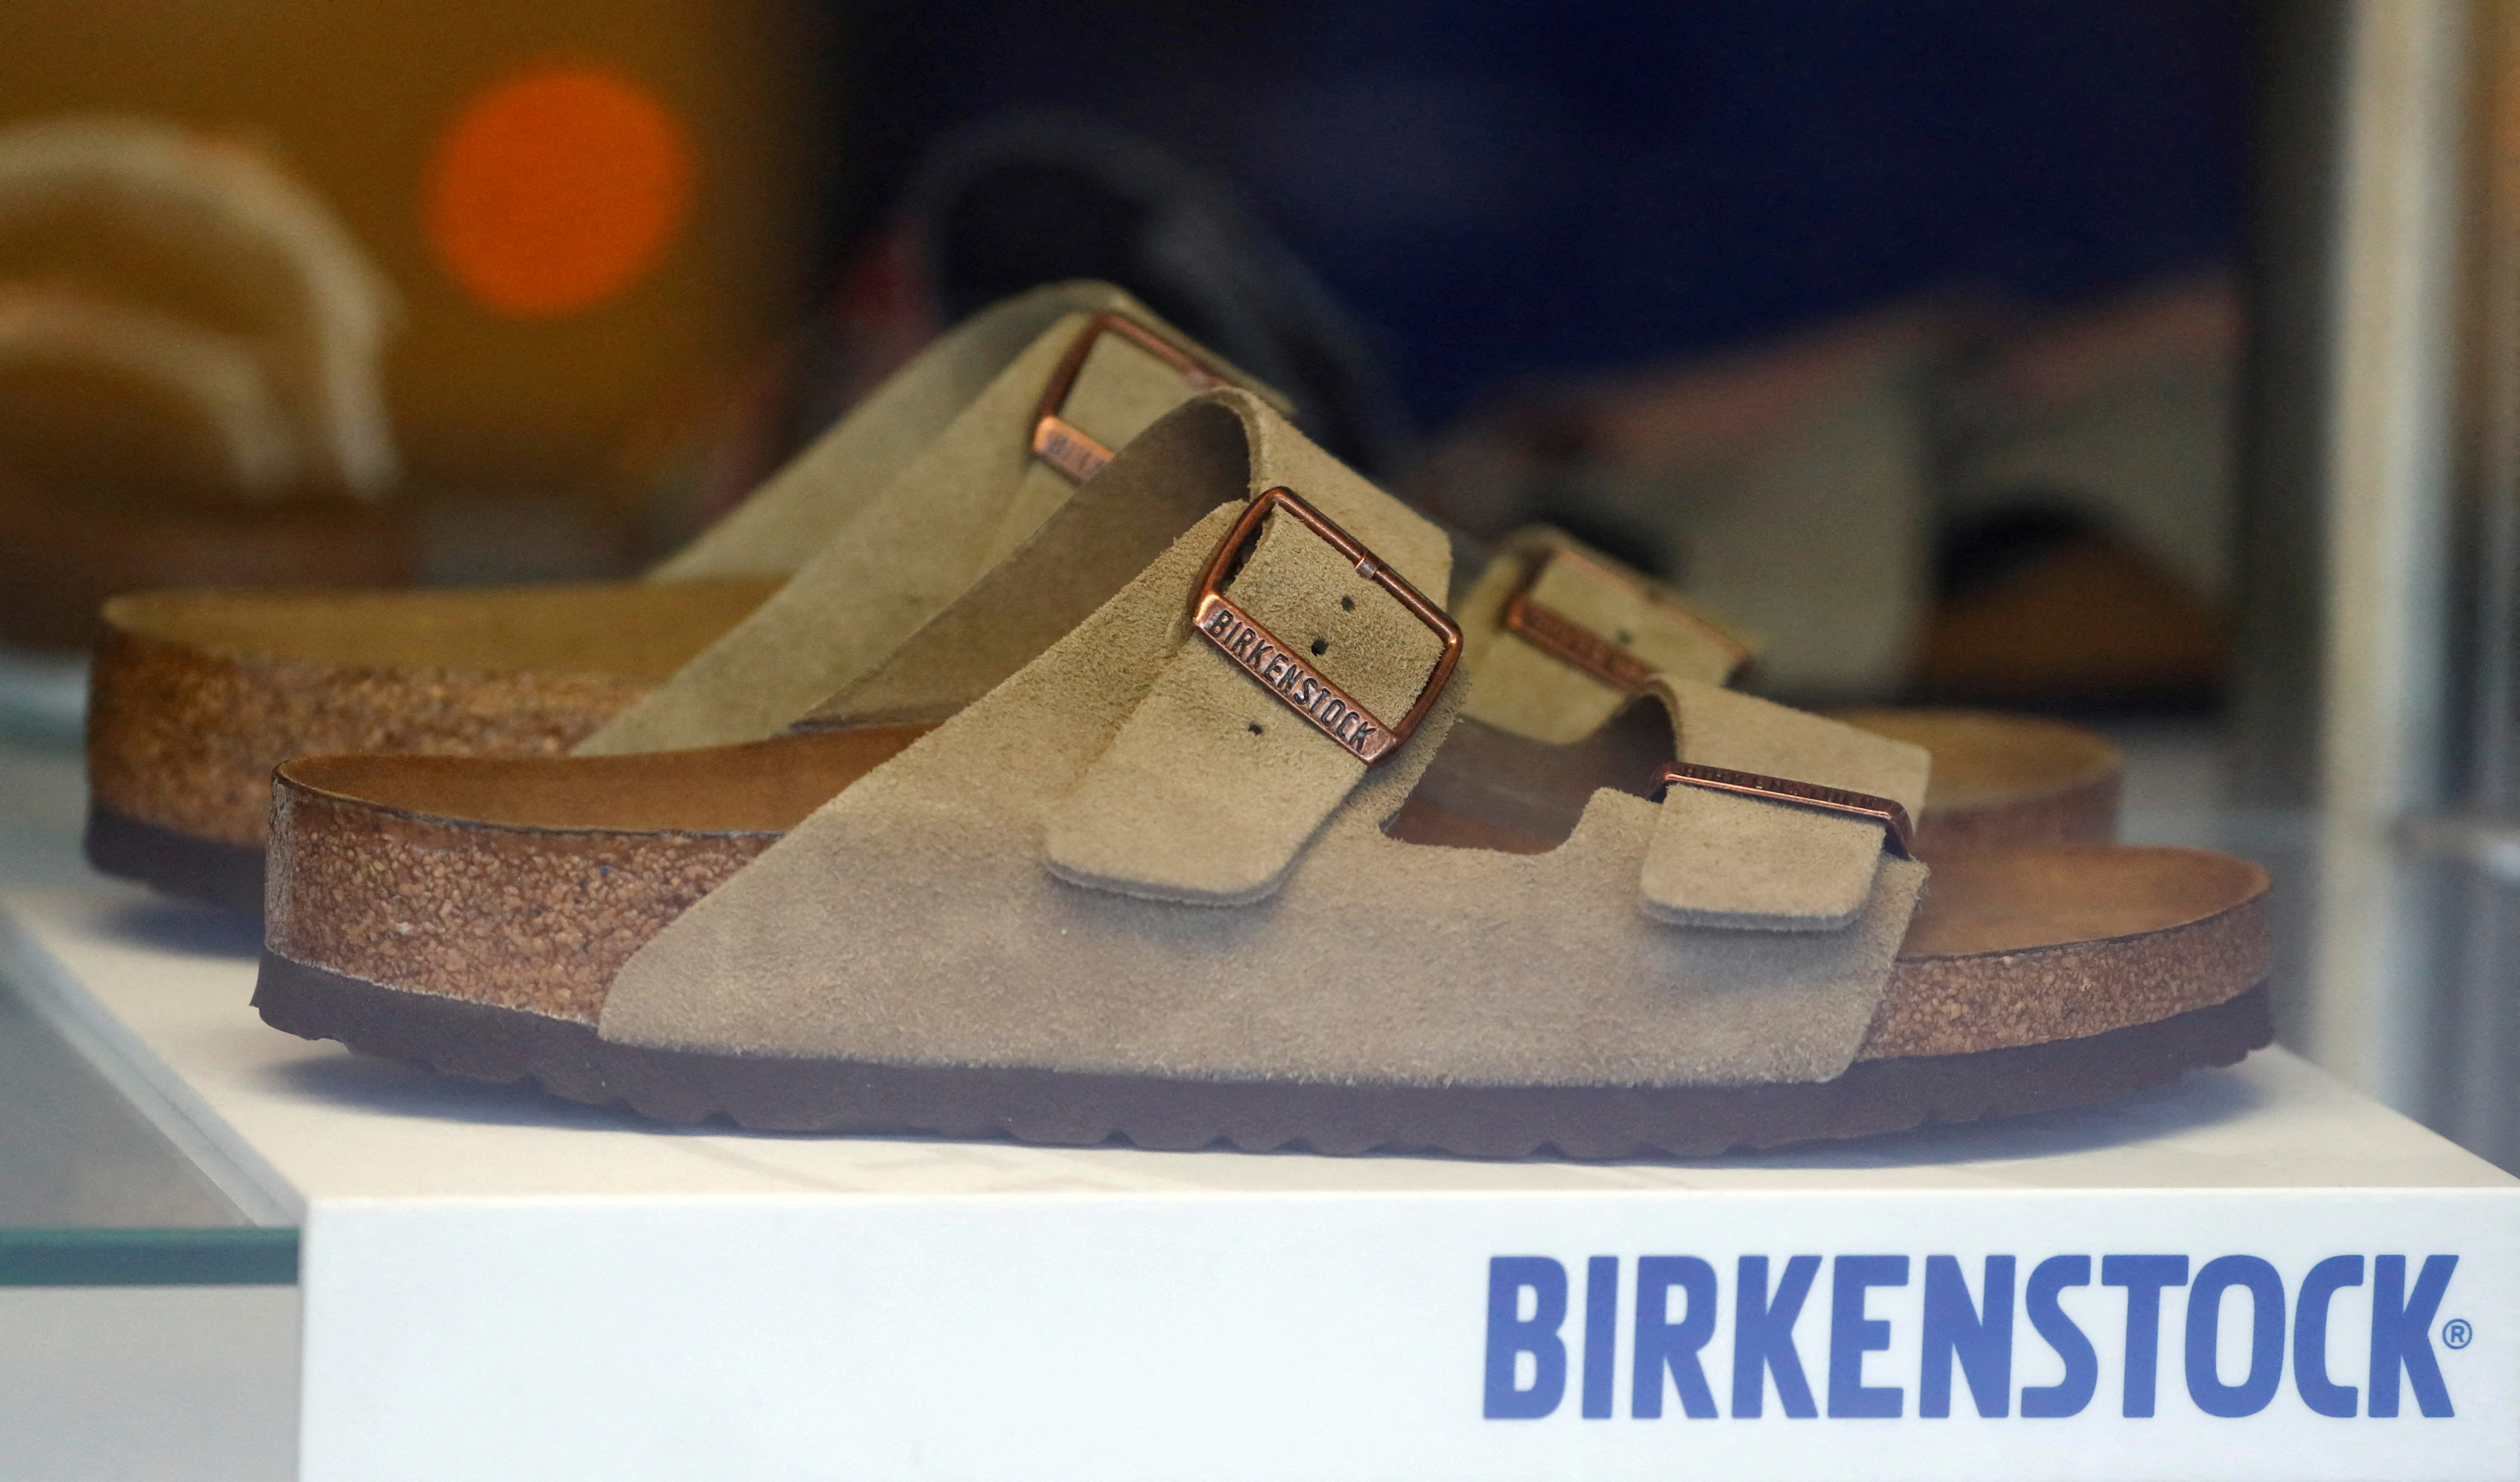 Birkenstock the latest shoe to drop in a tough IPO market